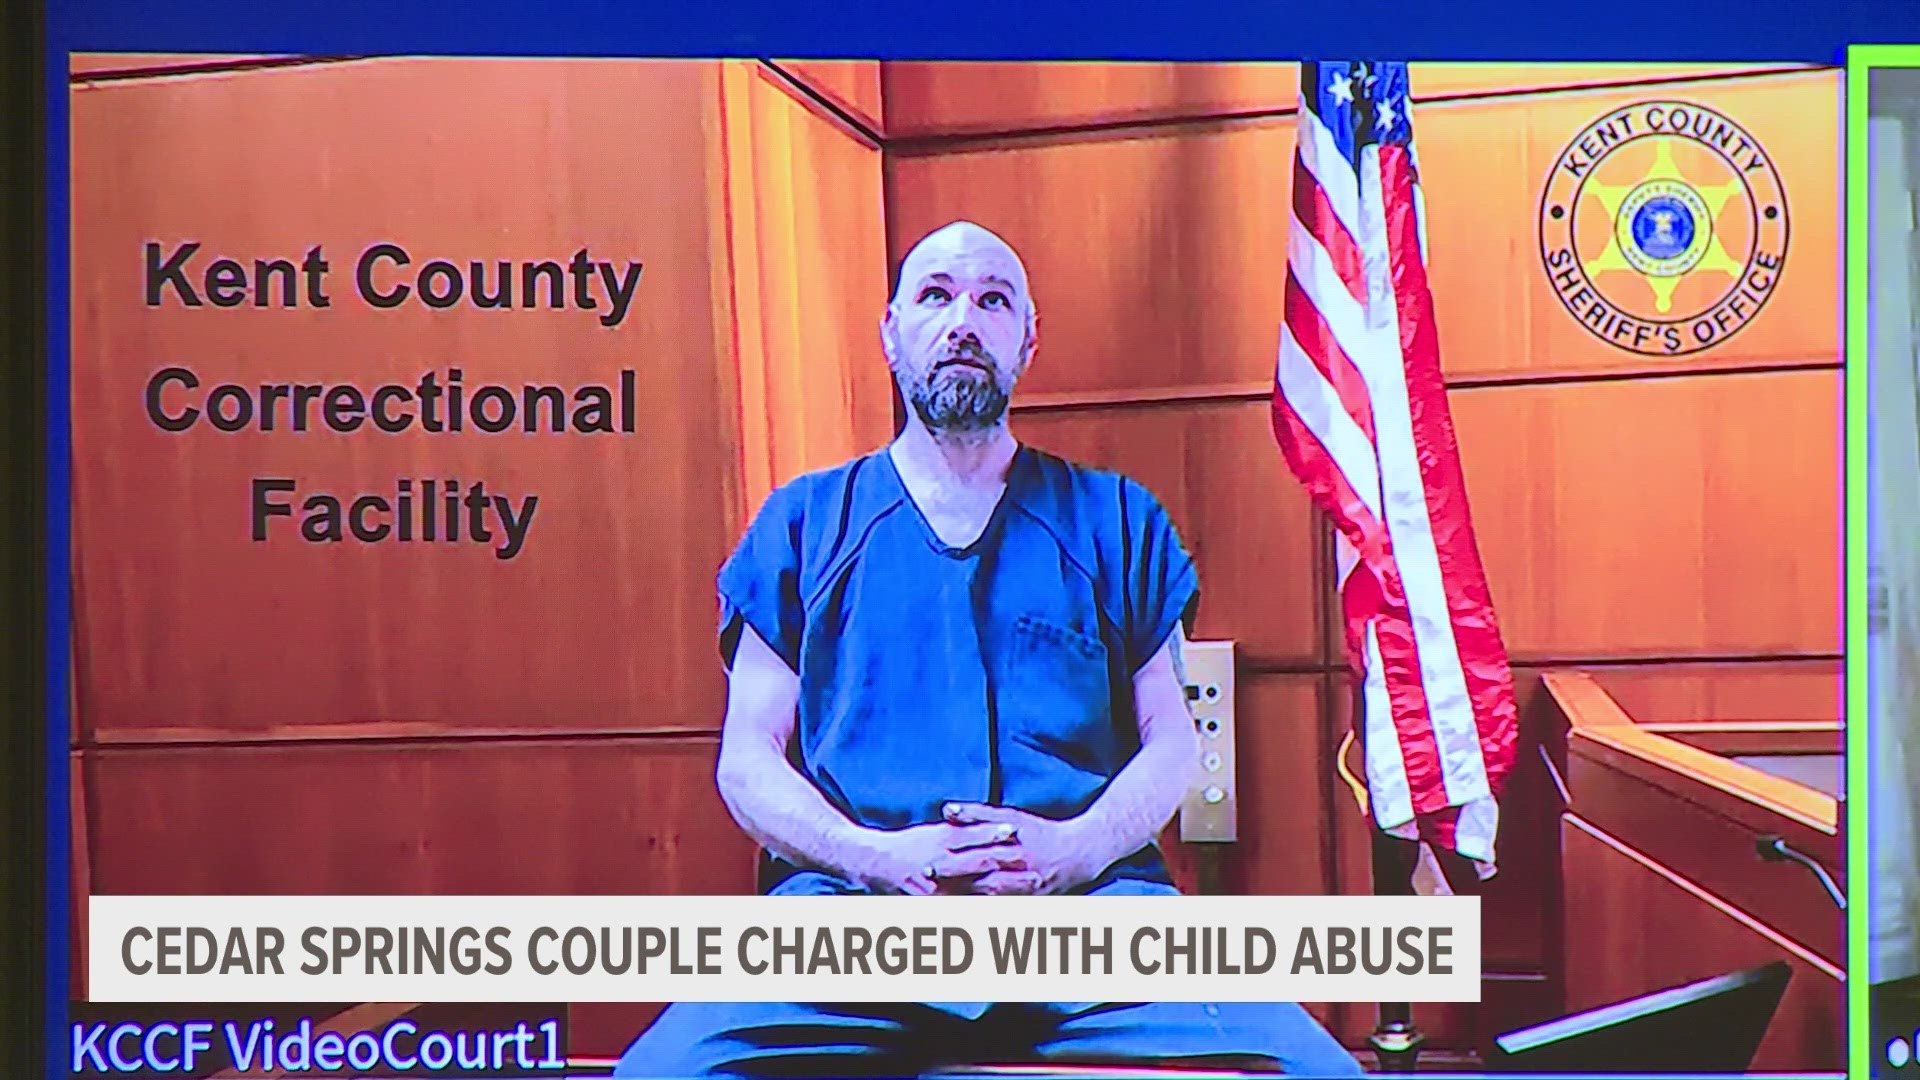 Besides physical abuse, authorities accuse the couple of keeping the boy inside a wooden box that is 3 feet wide and 4 feet deep for nearly 10 hours a day.